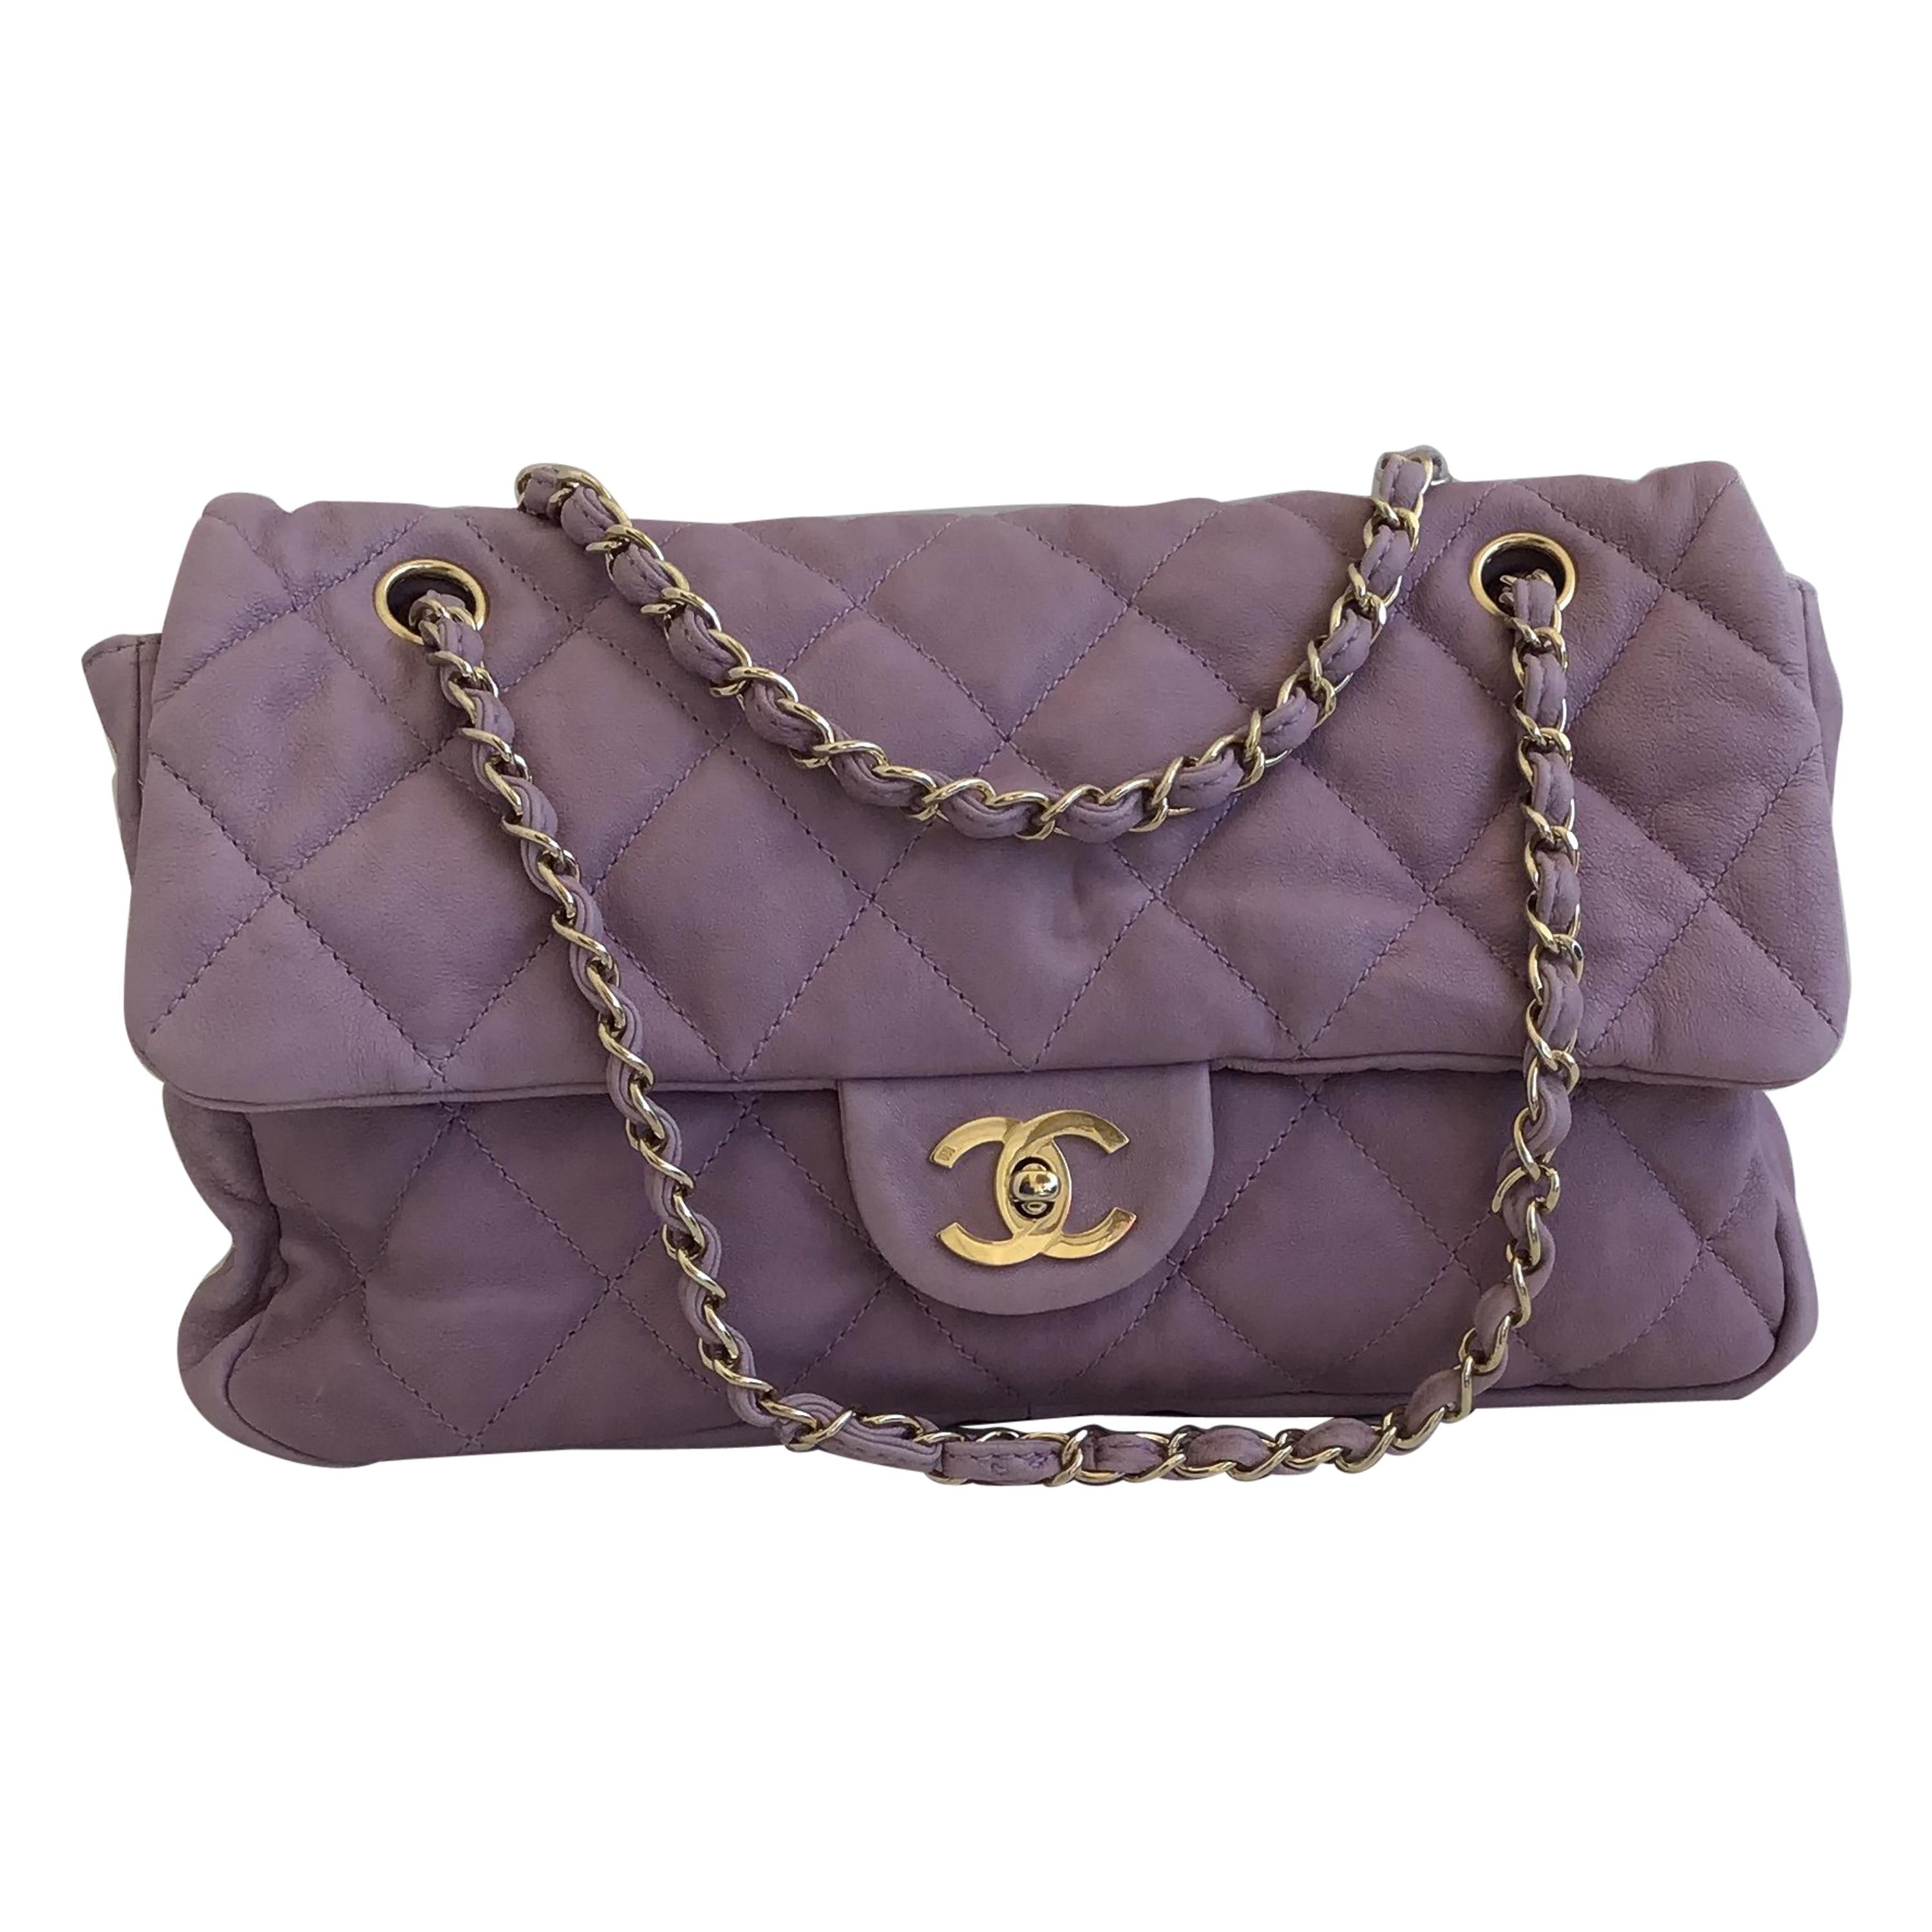 Chanel Lavender Flap Purse with Gold Hardware, Size Medium